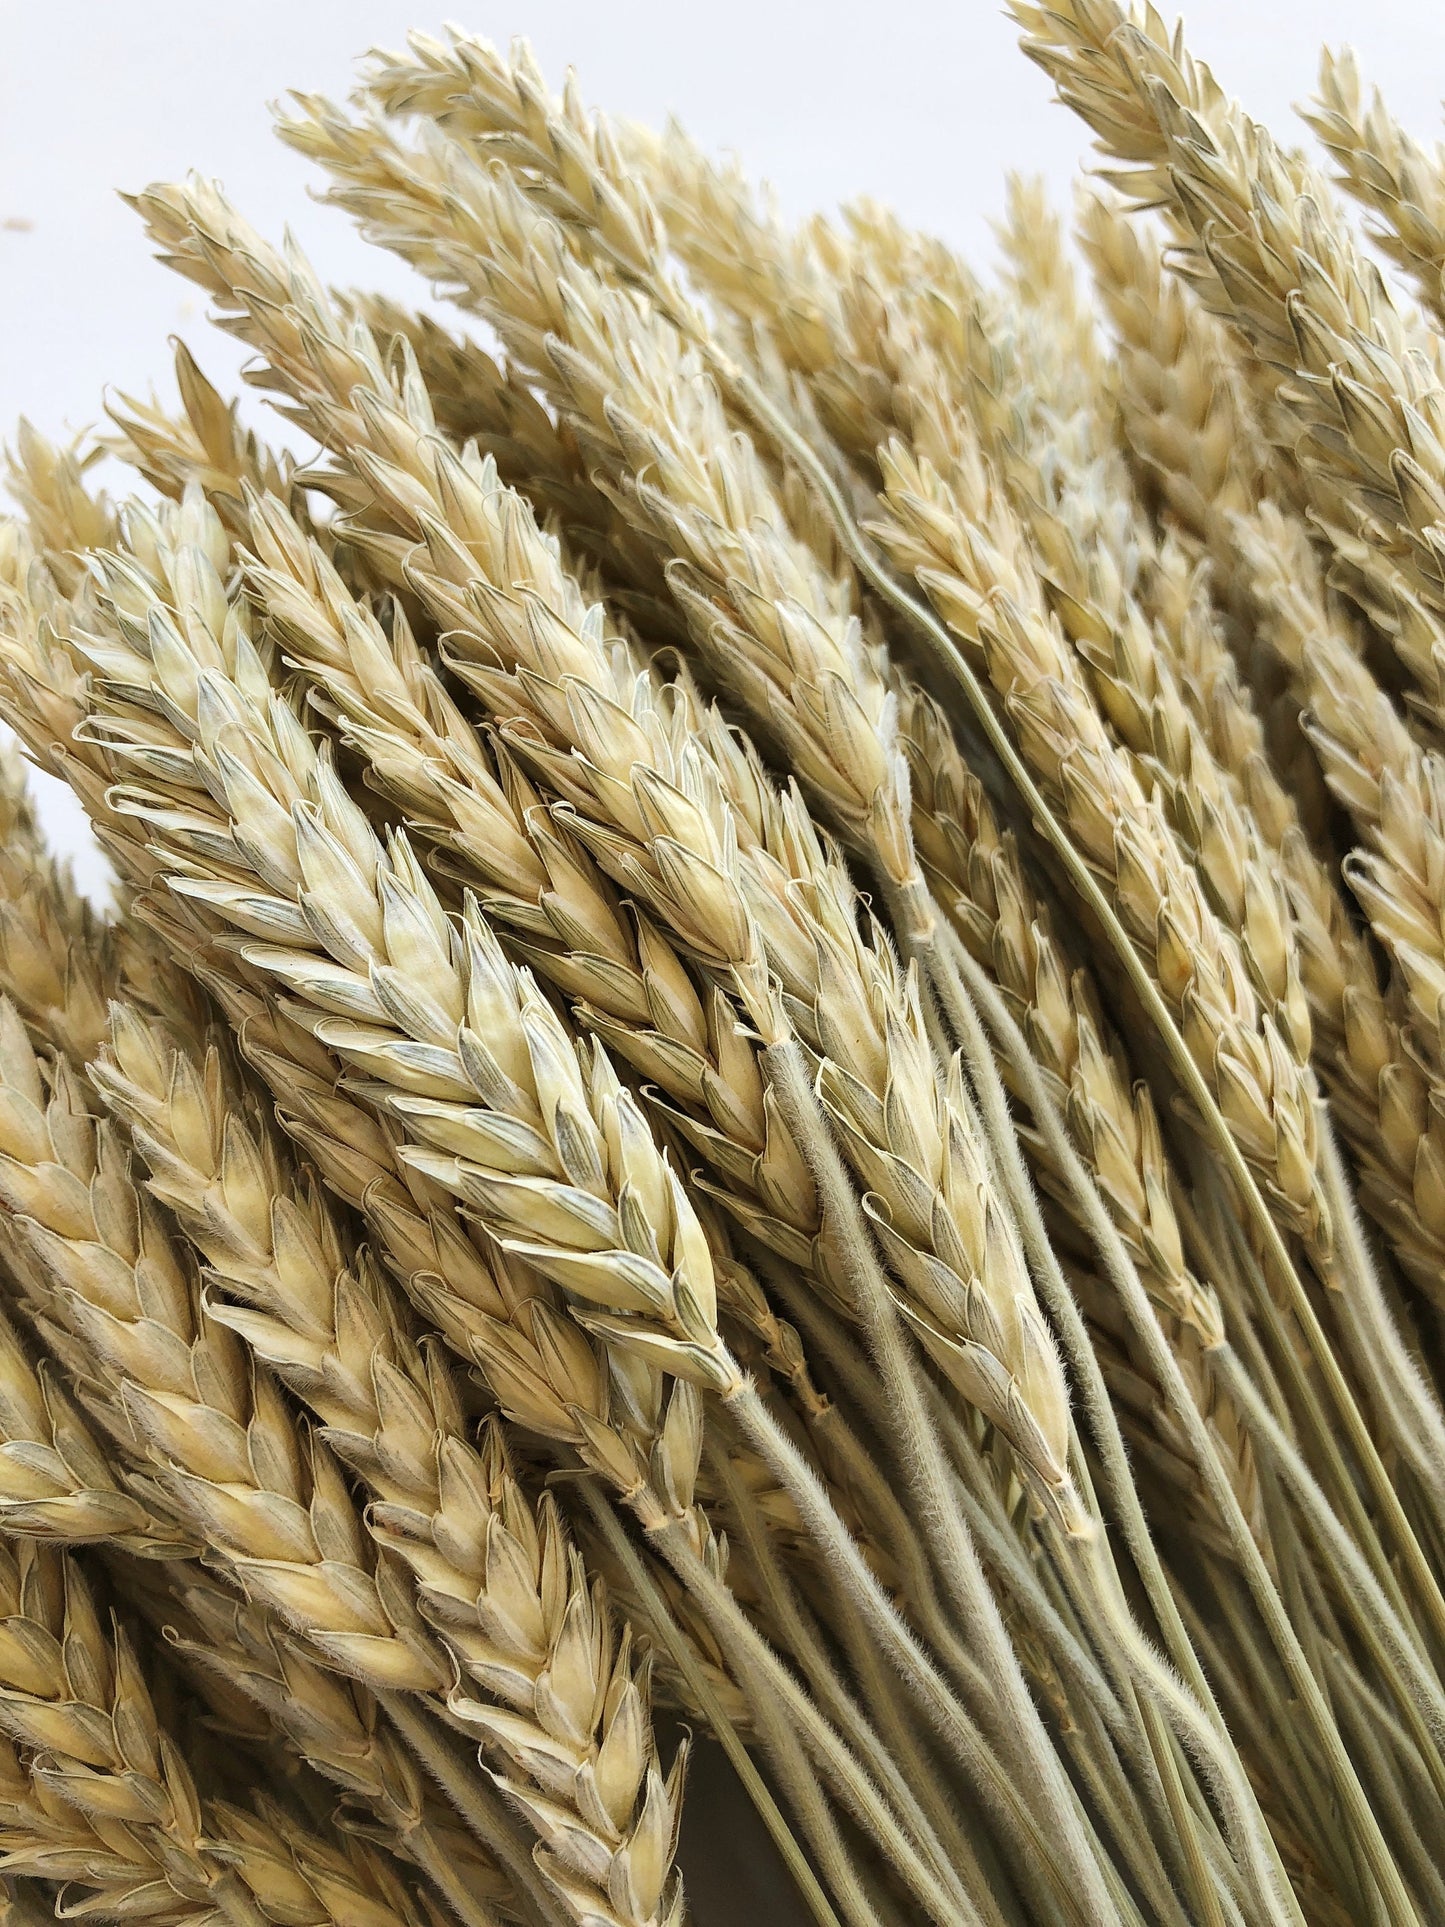 Triticale Beardless Green Wheat, Cereal Grains, Green, Tan, Dried Flowers, Wedding Floral, Bouquets, Fall, Dry Filler Flowers, Home Decor